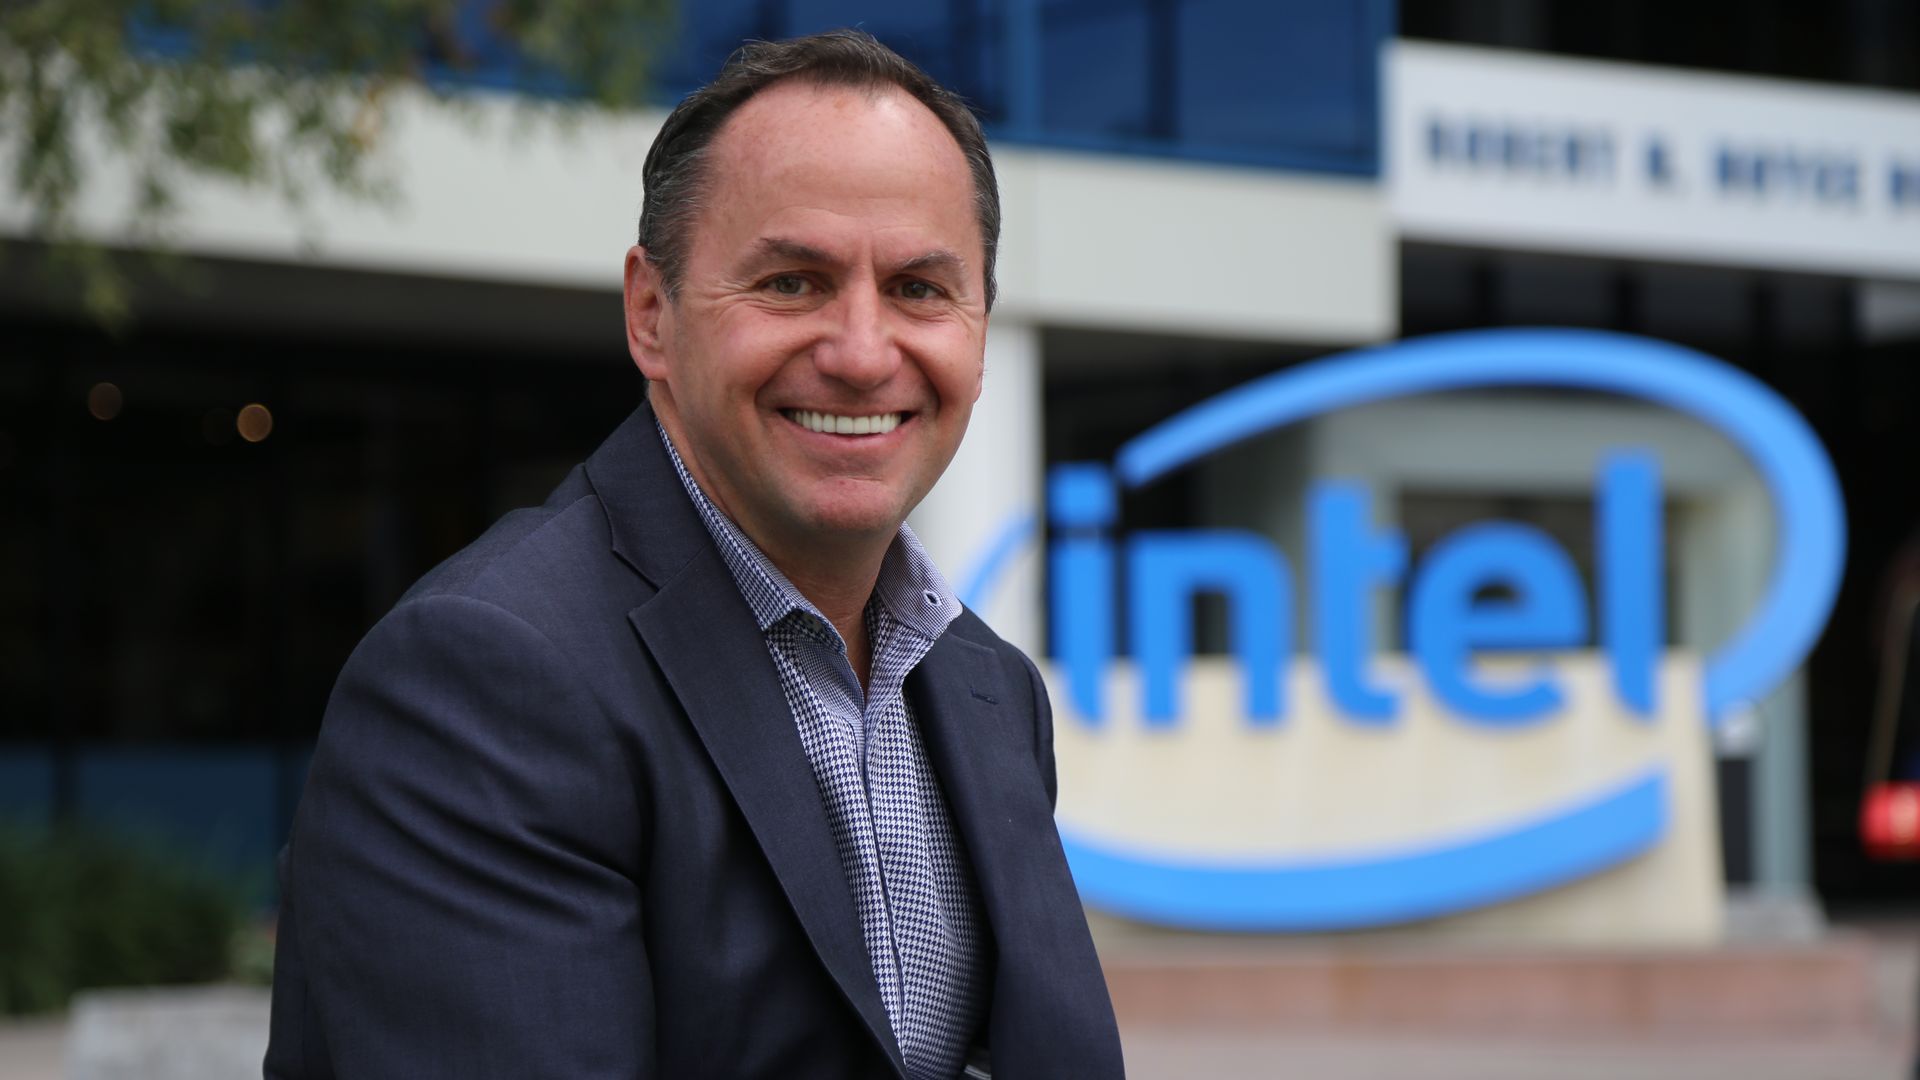 Intel CEO Bob Swan, seen in front of company headquarters